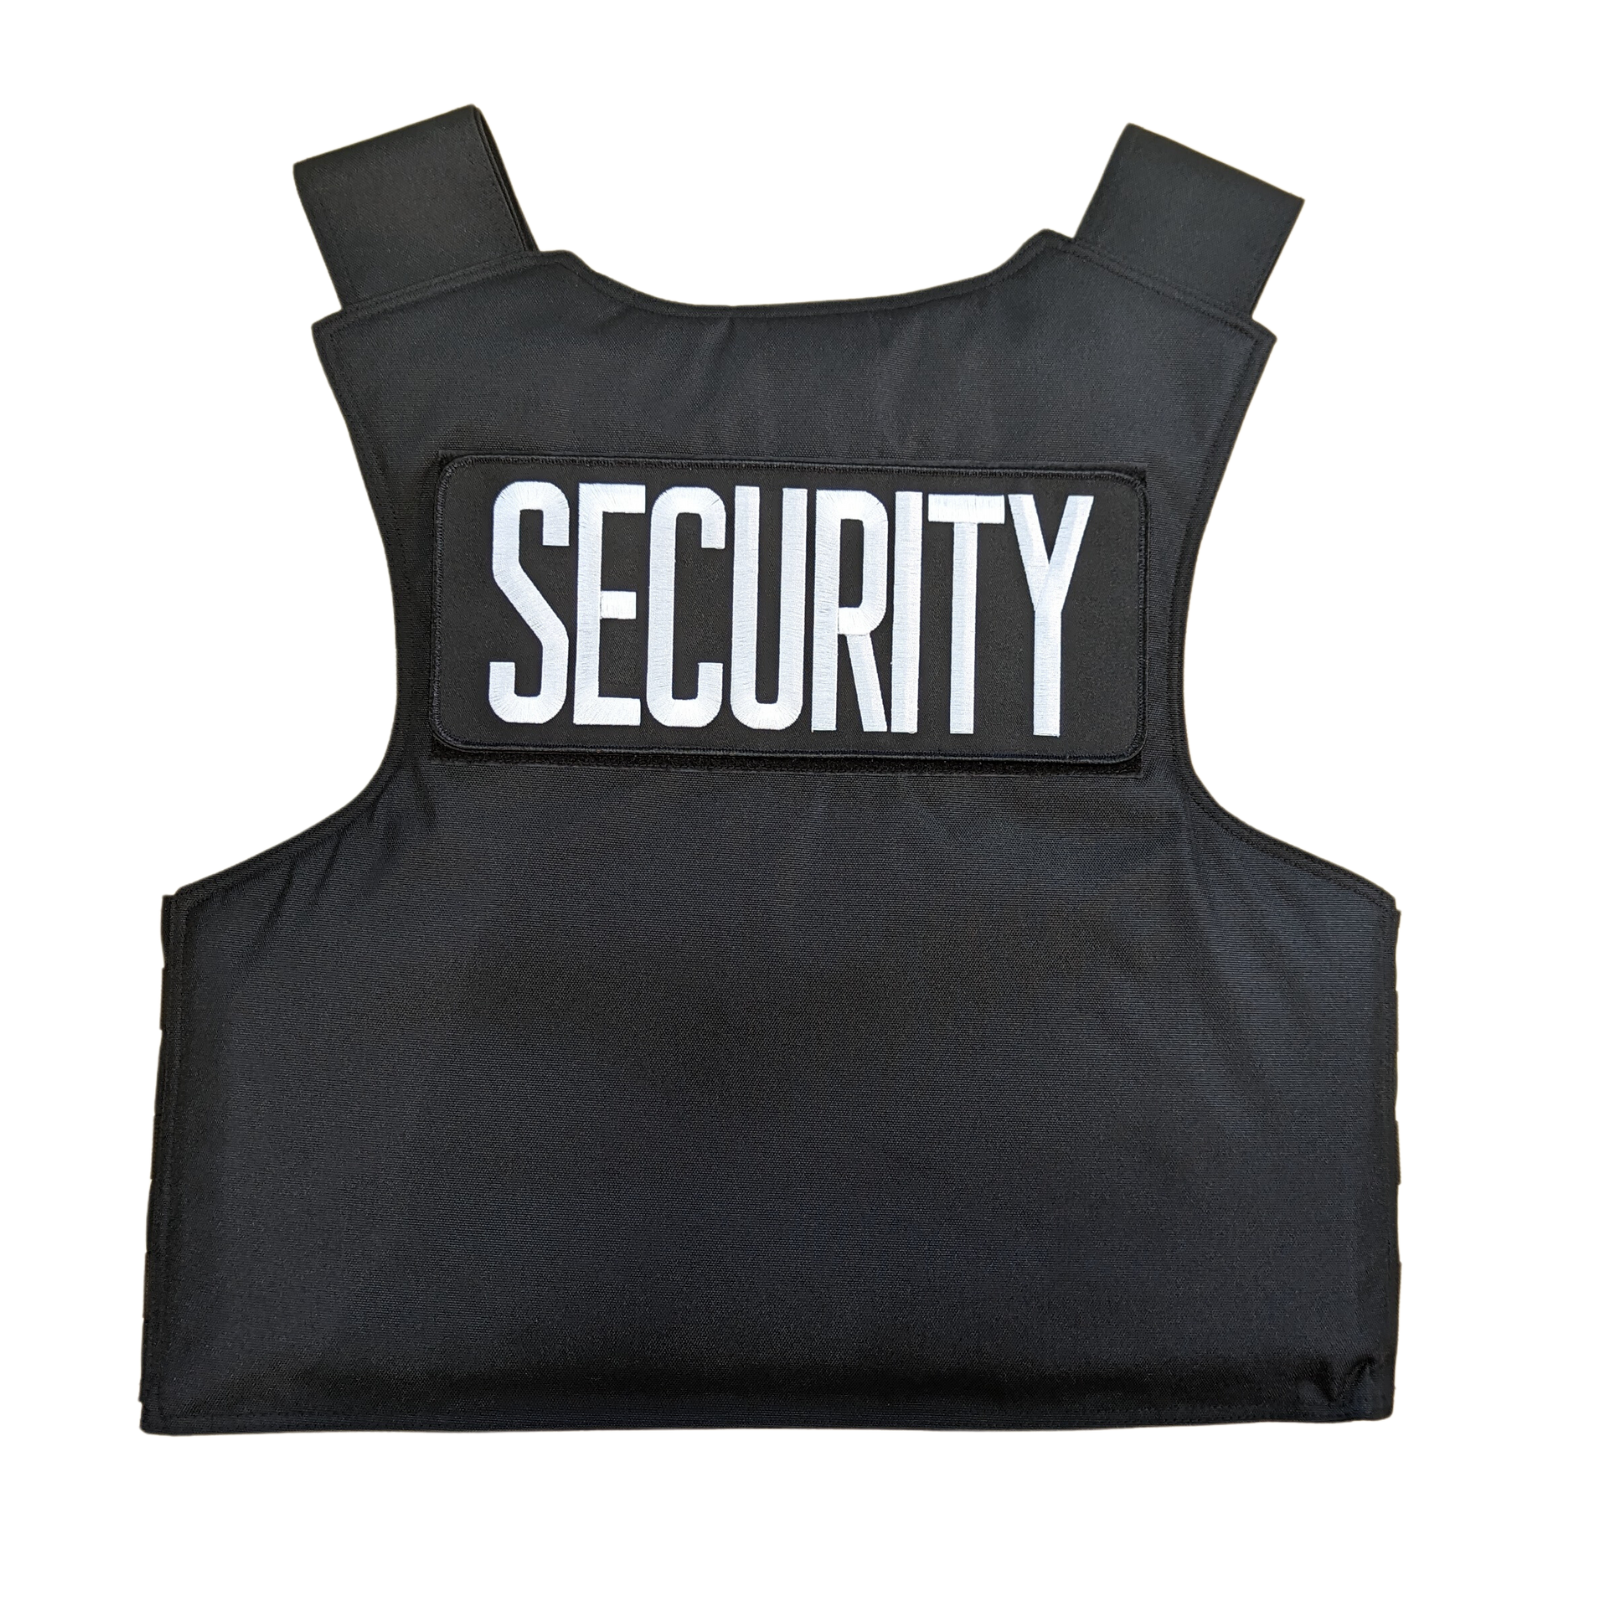 Bullet Proof Plate Carrier – Guardian Outfitters